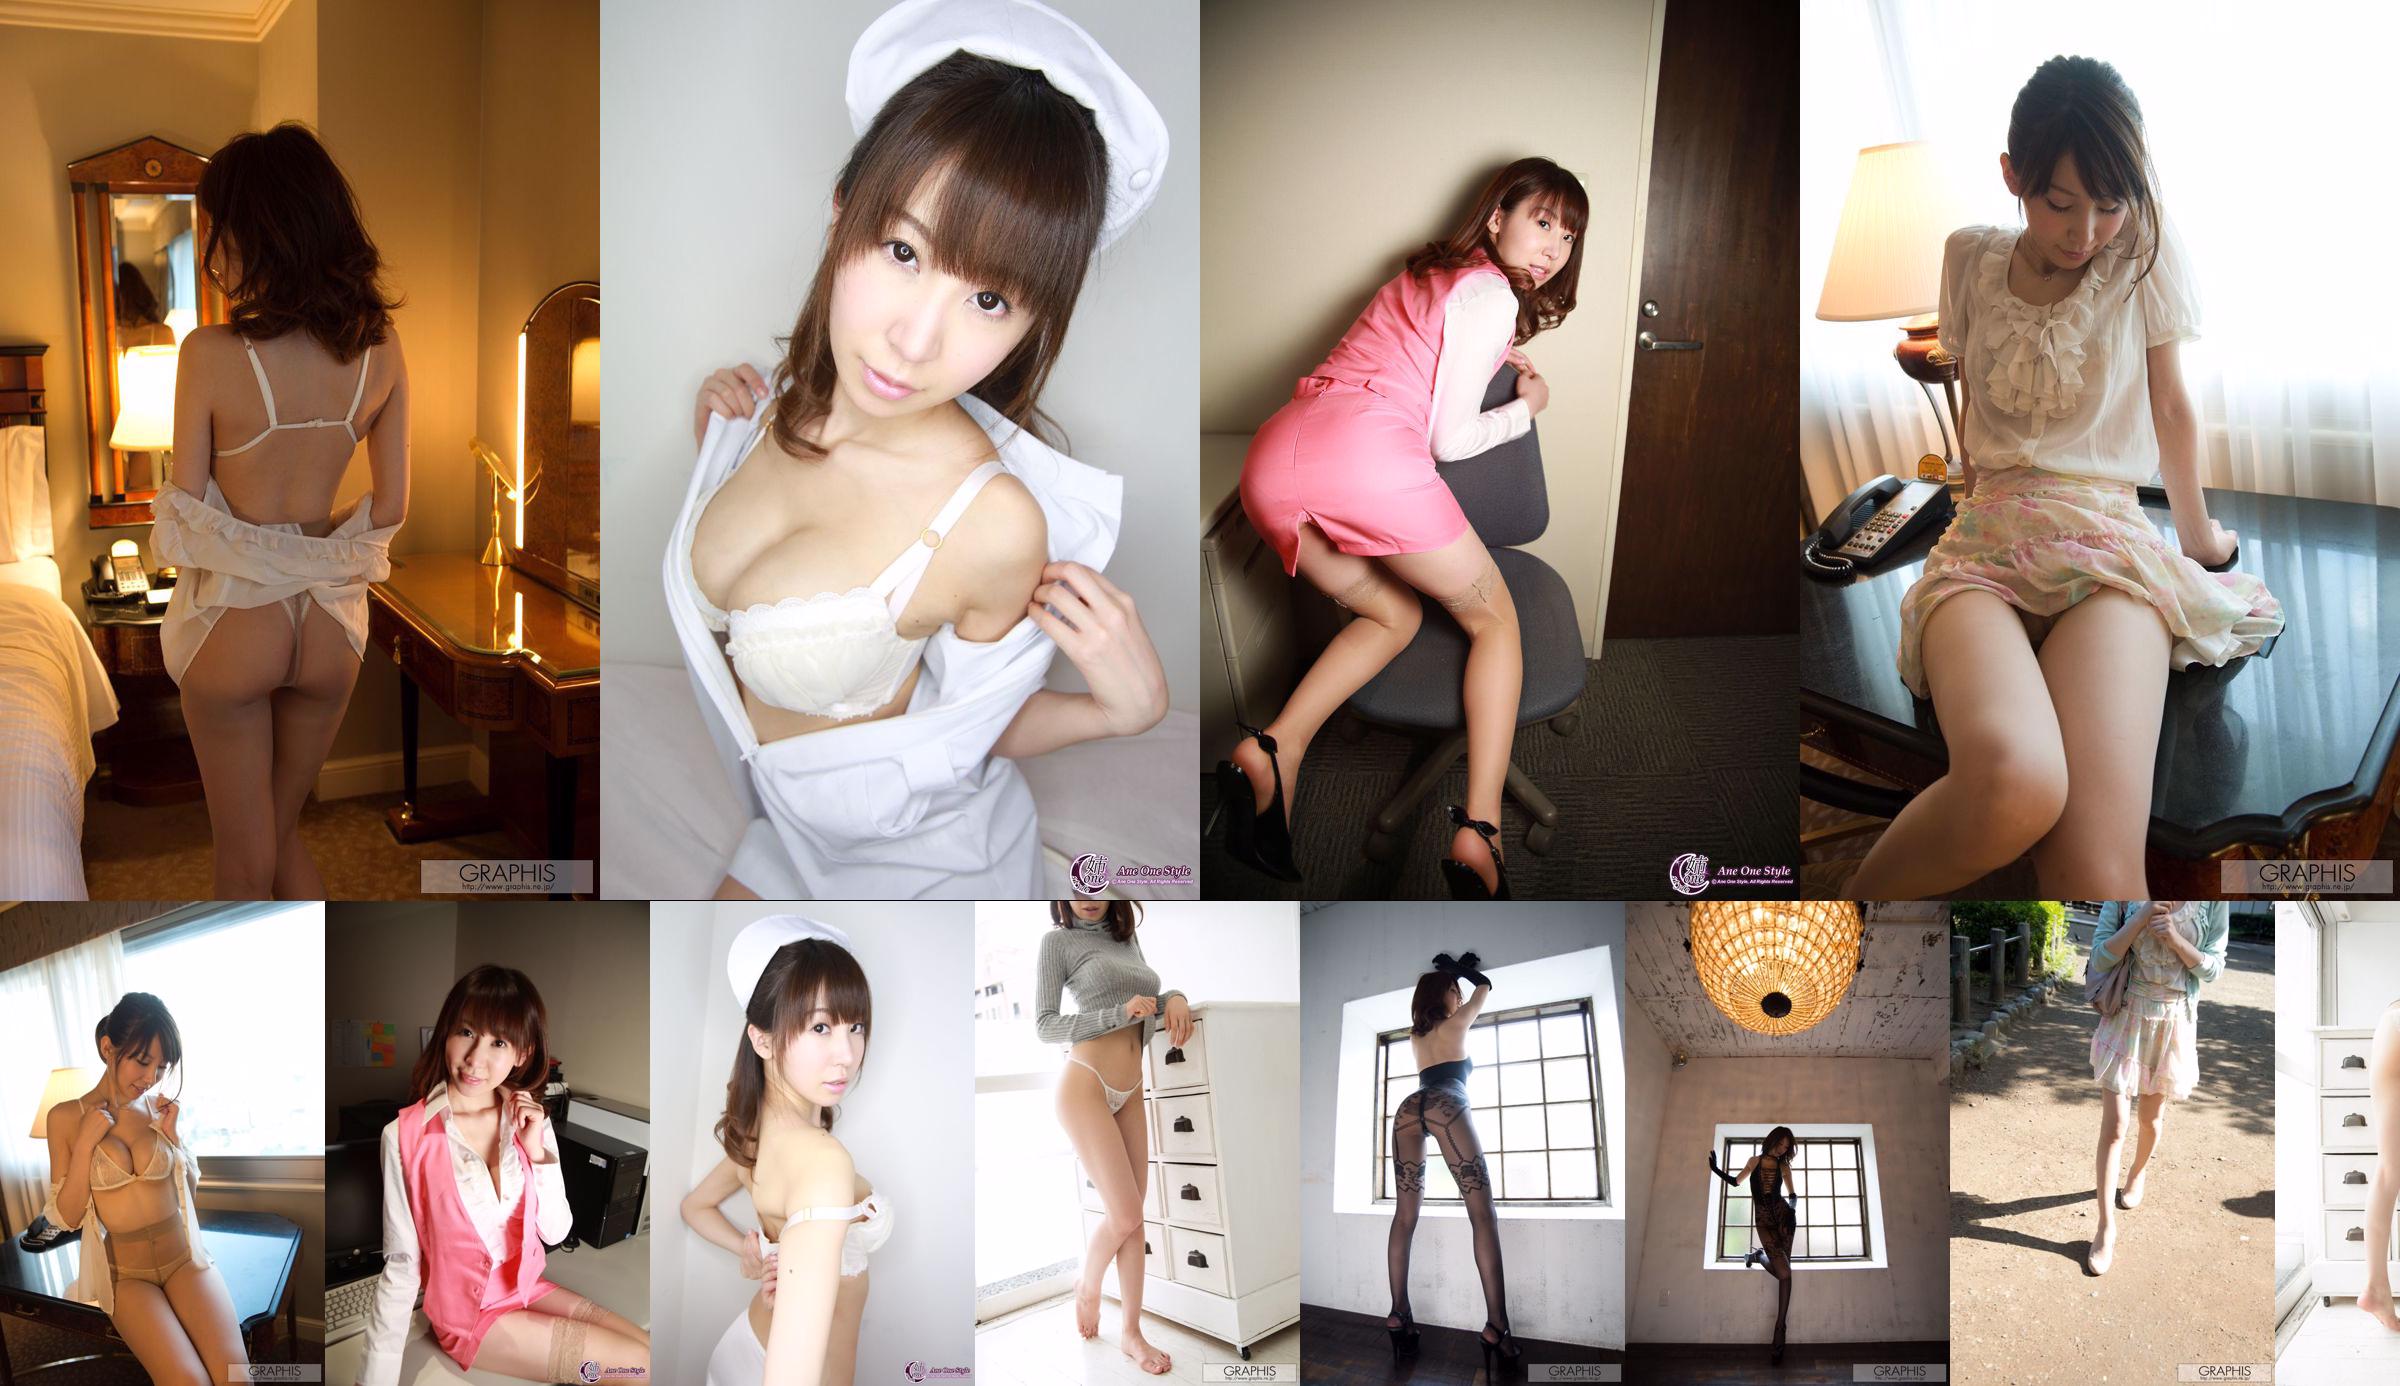 Chibana Meisa / Chibana Meisa [Graphis] First Gravure First take off daughter No.1d21fc Page 4